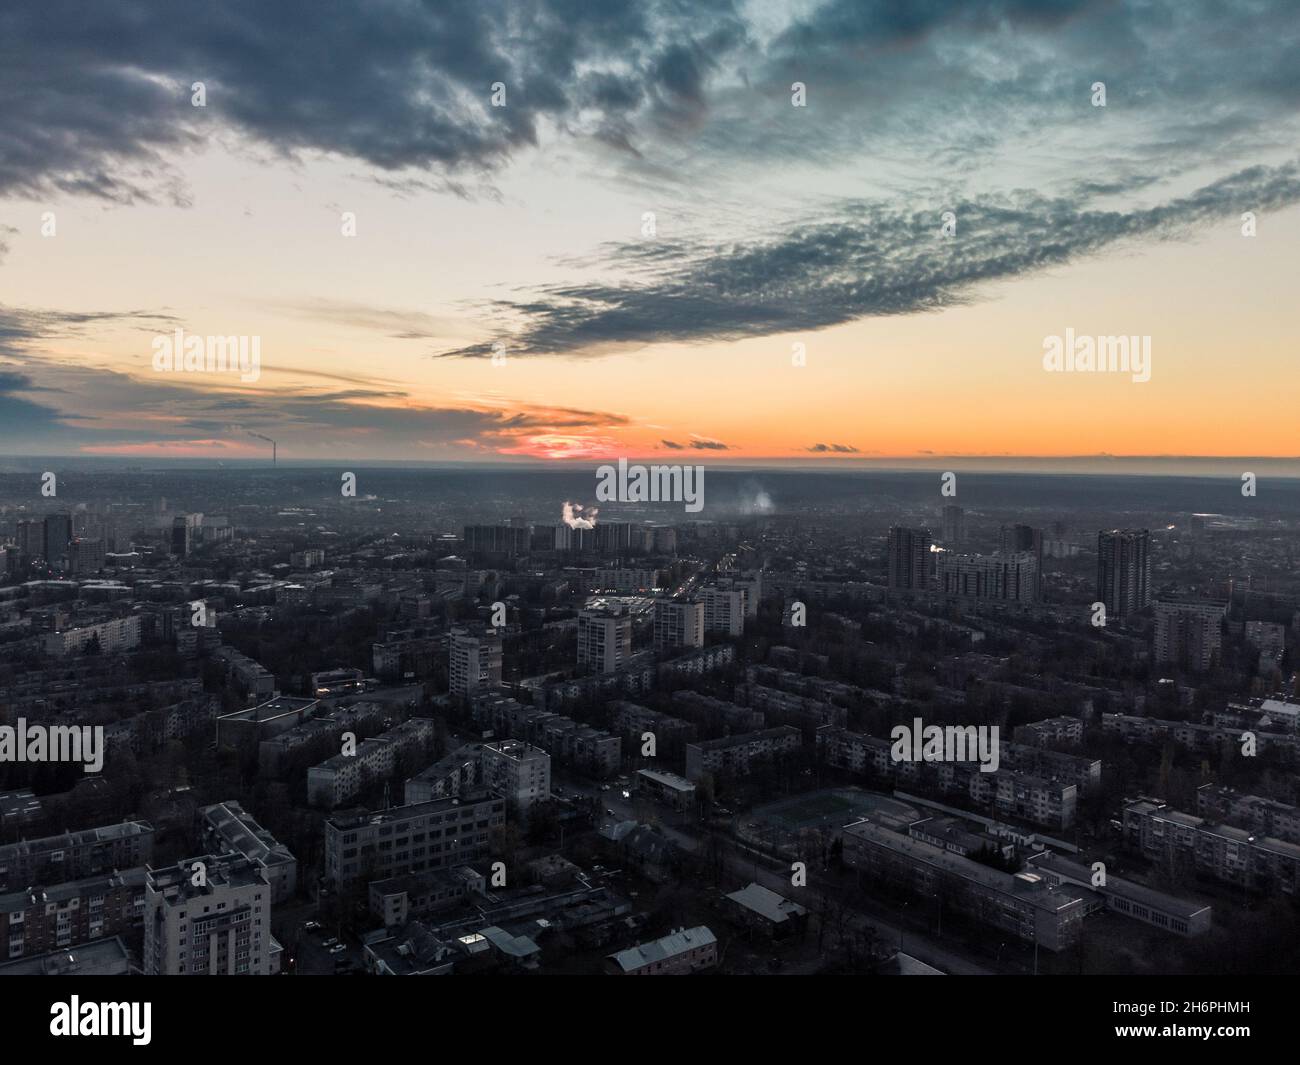 Aerial sunset evening view on residential Kharkiv city Pavlove Pole district. Gray multistory buildings with scenic bright orange cloudy sky on horizo Stock Photo